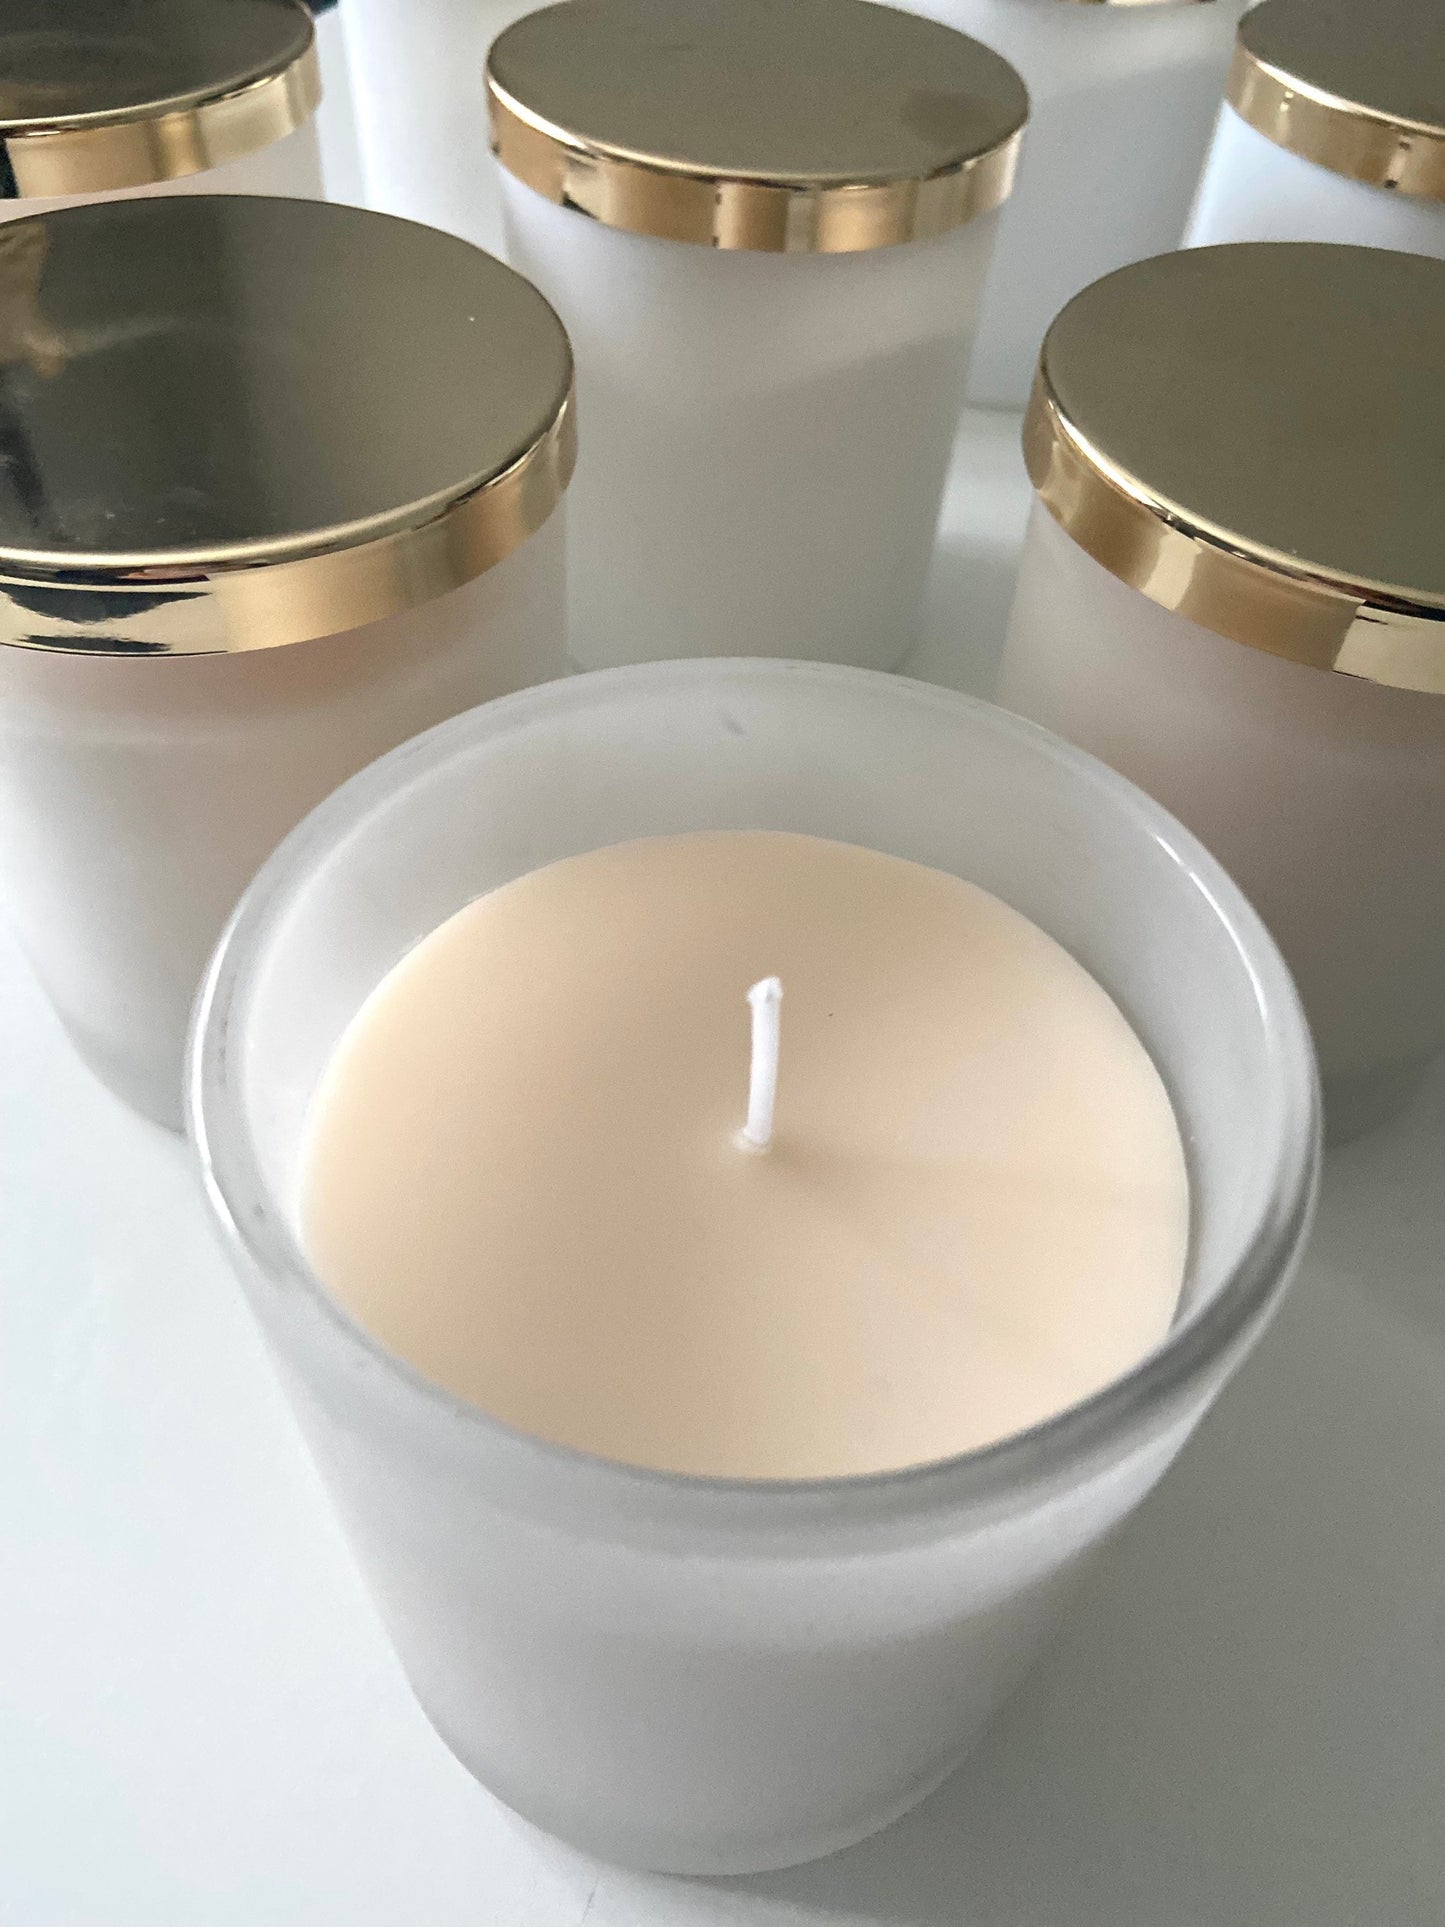 Cat Odour Neutralising Candle